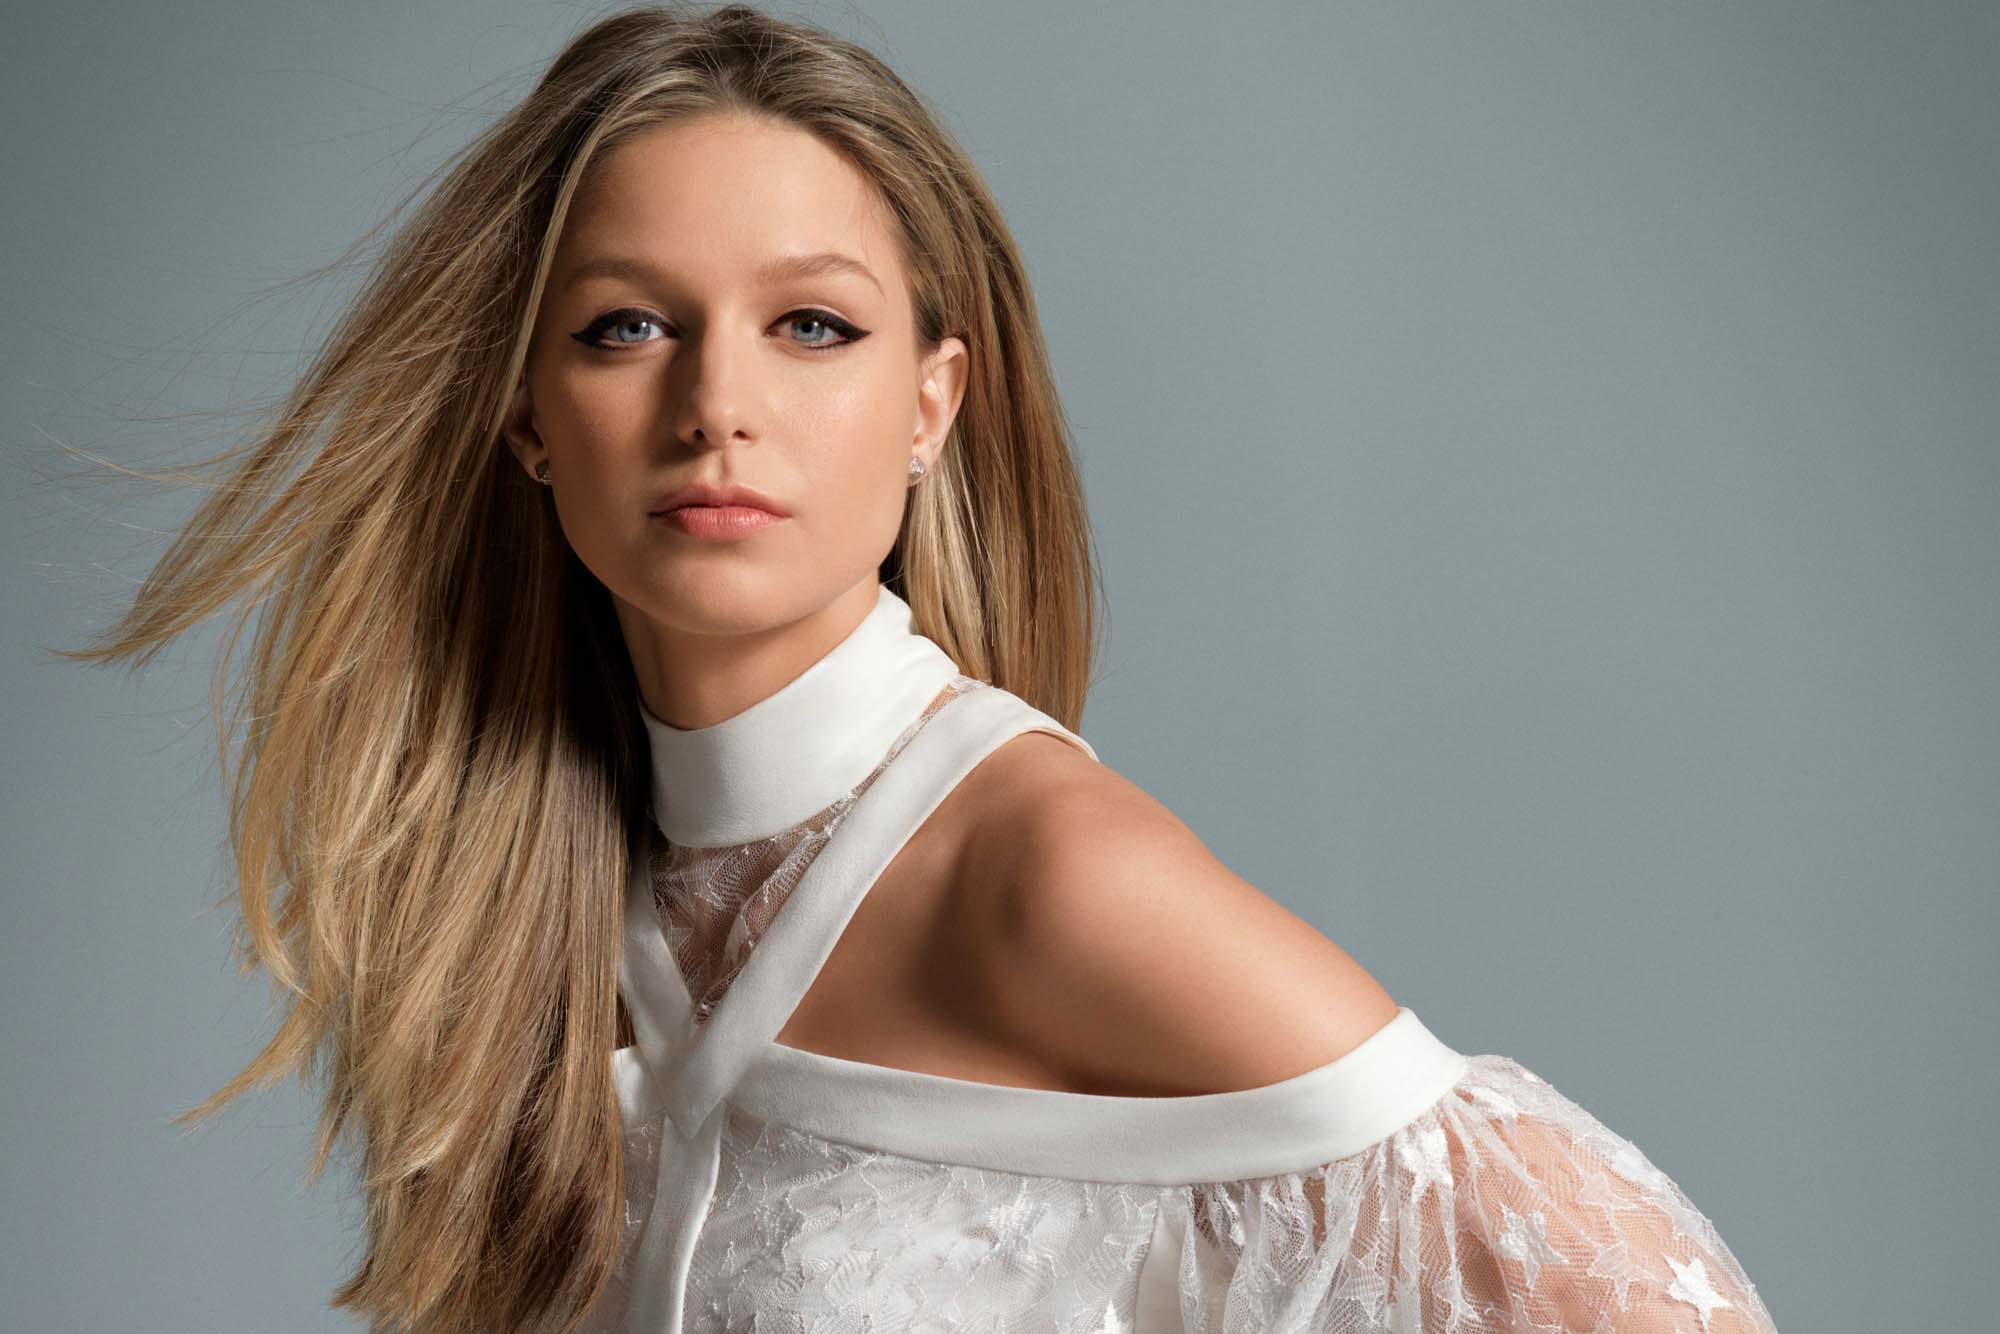 720x1280 Melissa Benoist Wallpapers for Mobile Phone [HD]